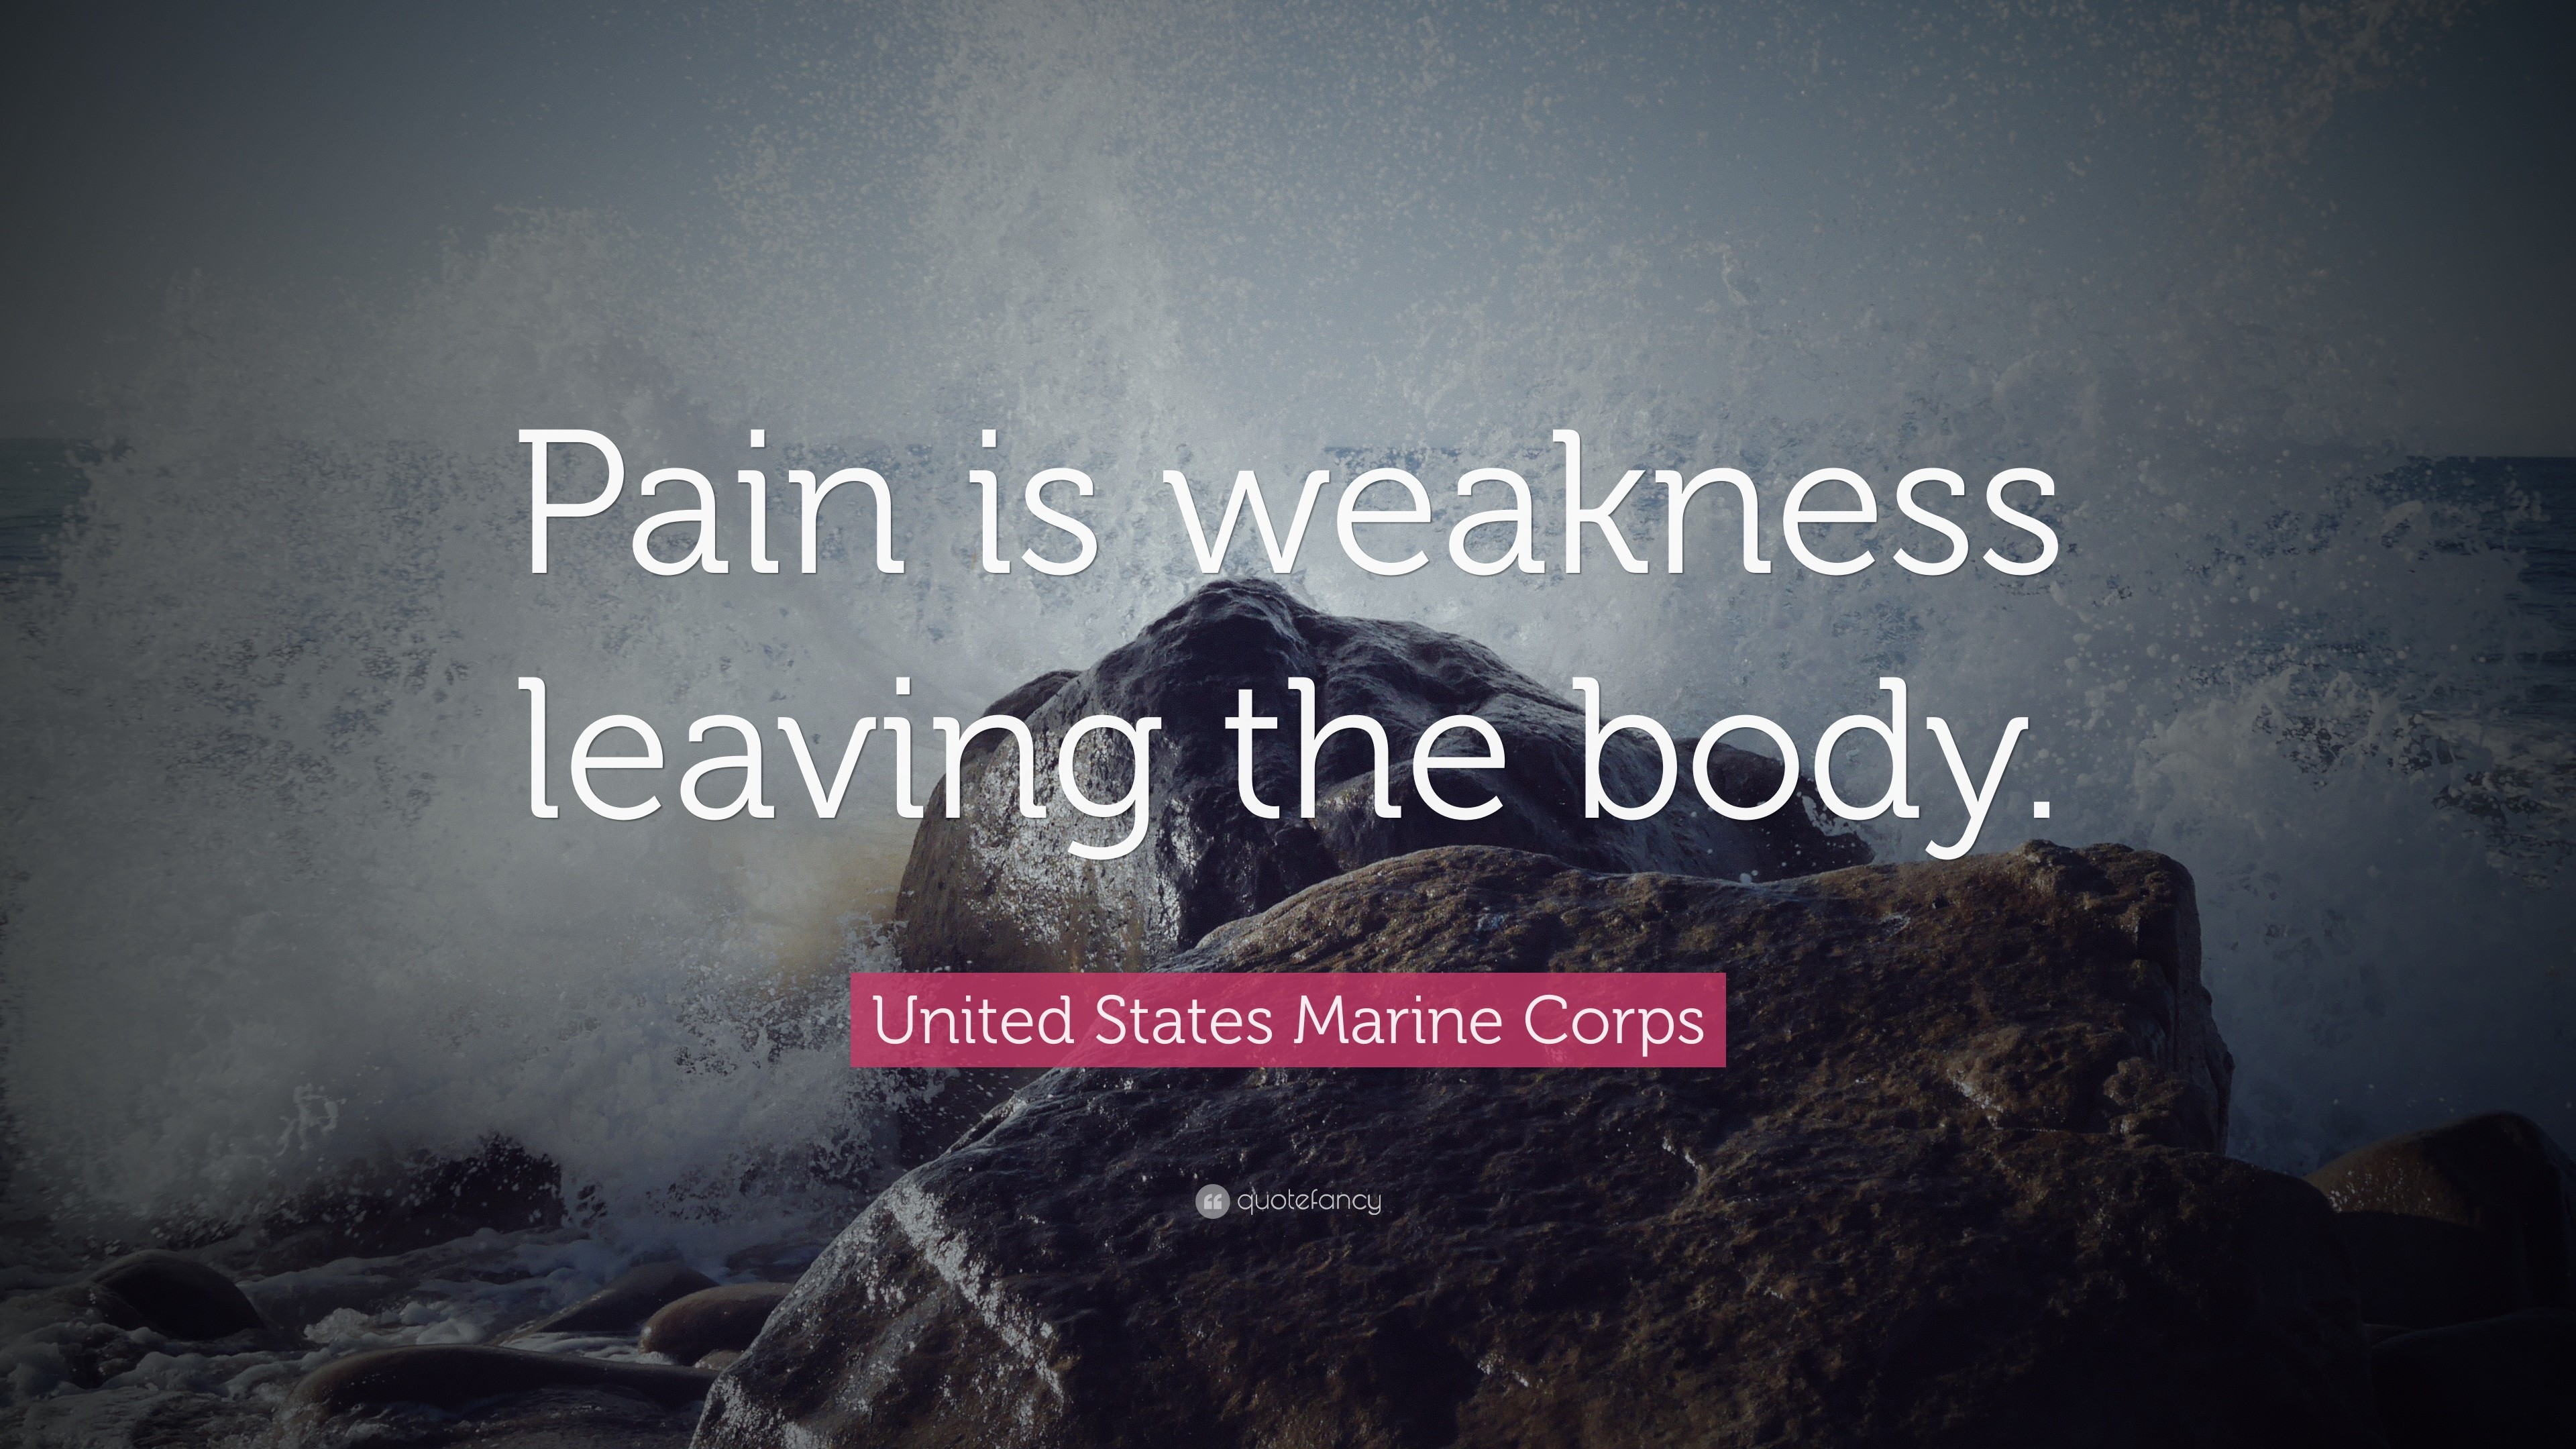 3840x2160 United States Marine Corps Quote: “Pain is weakness leaving the body.”